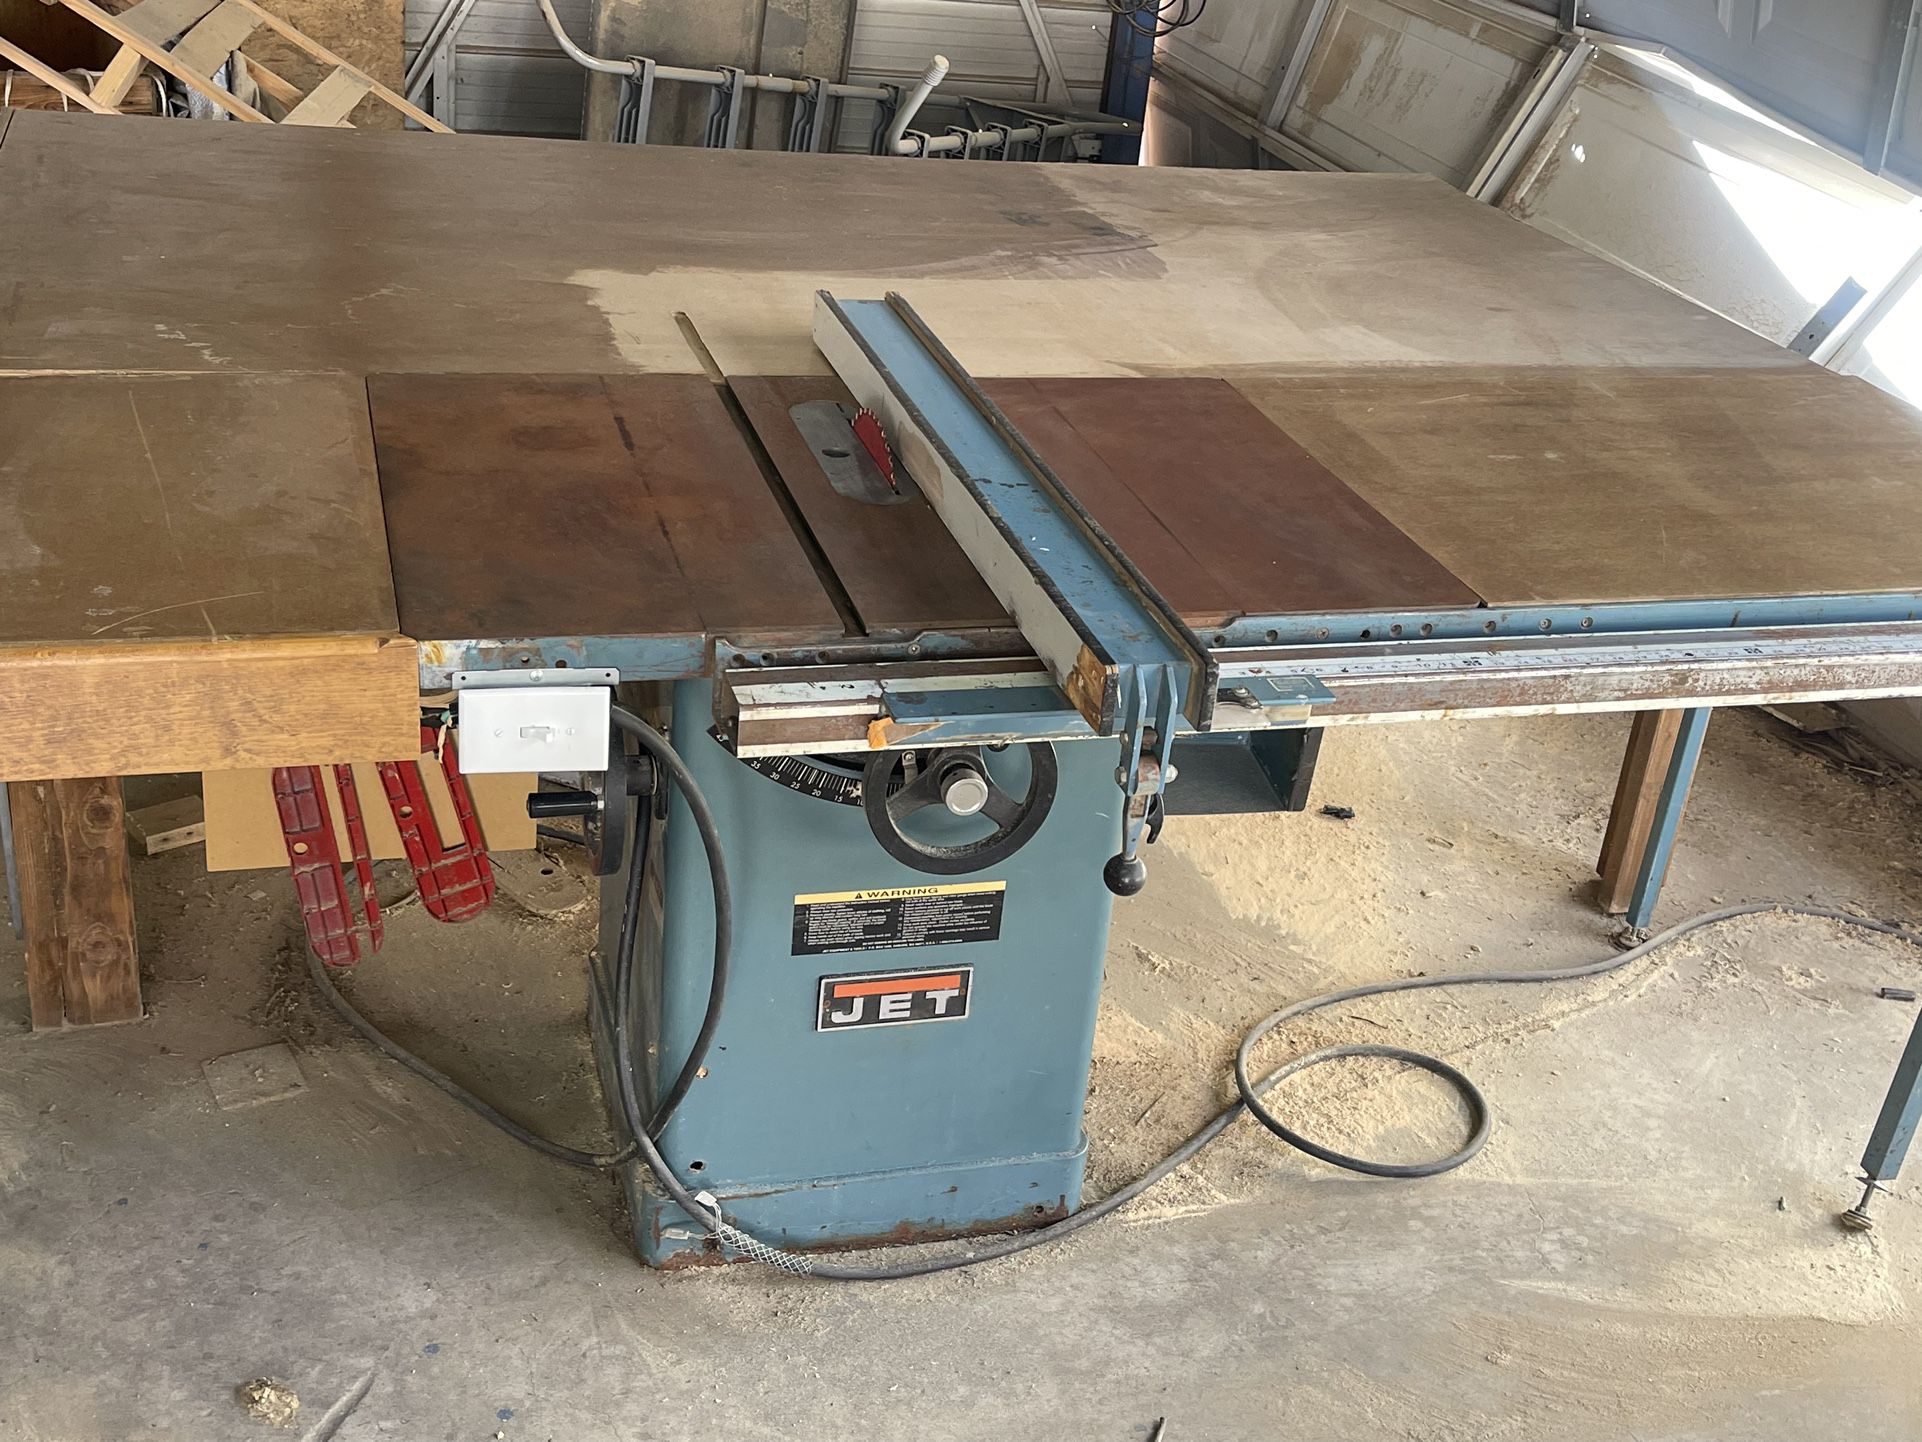 Electric table saw